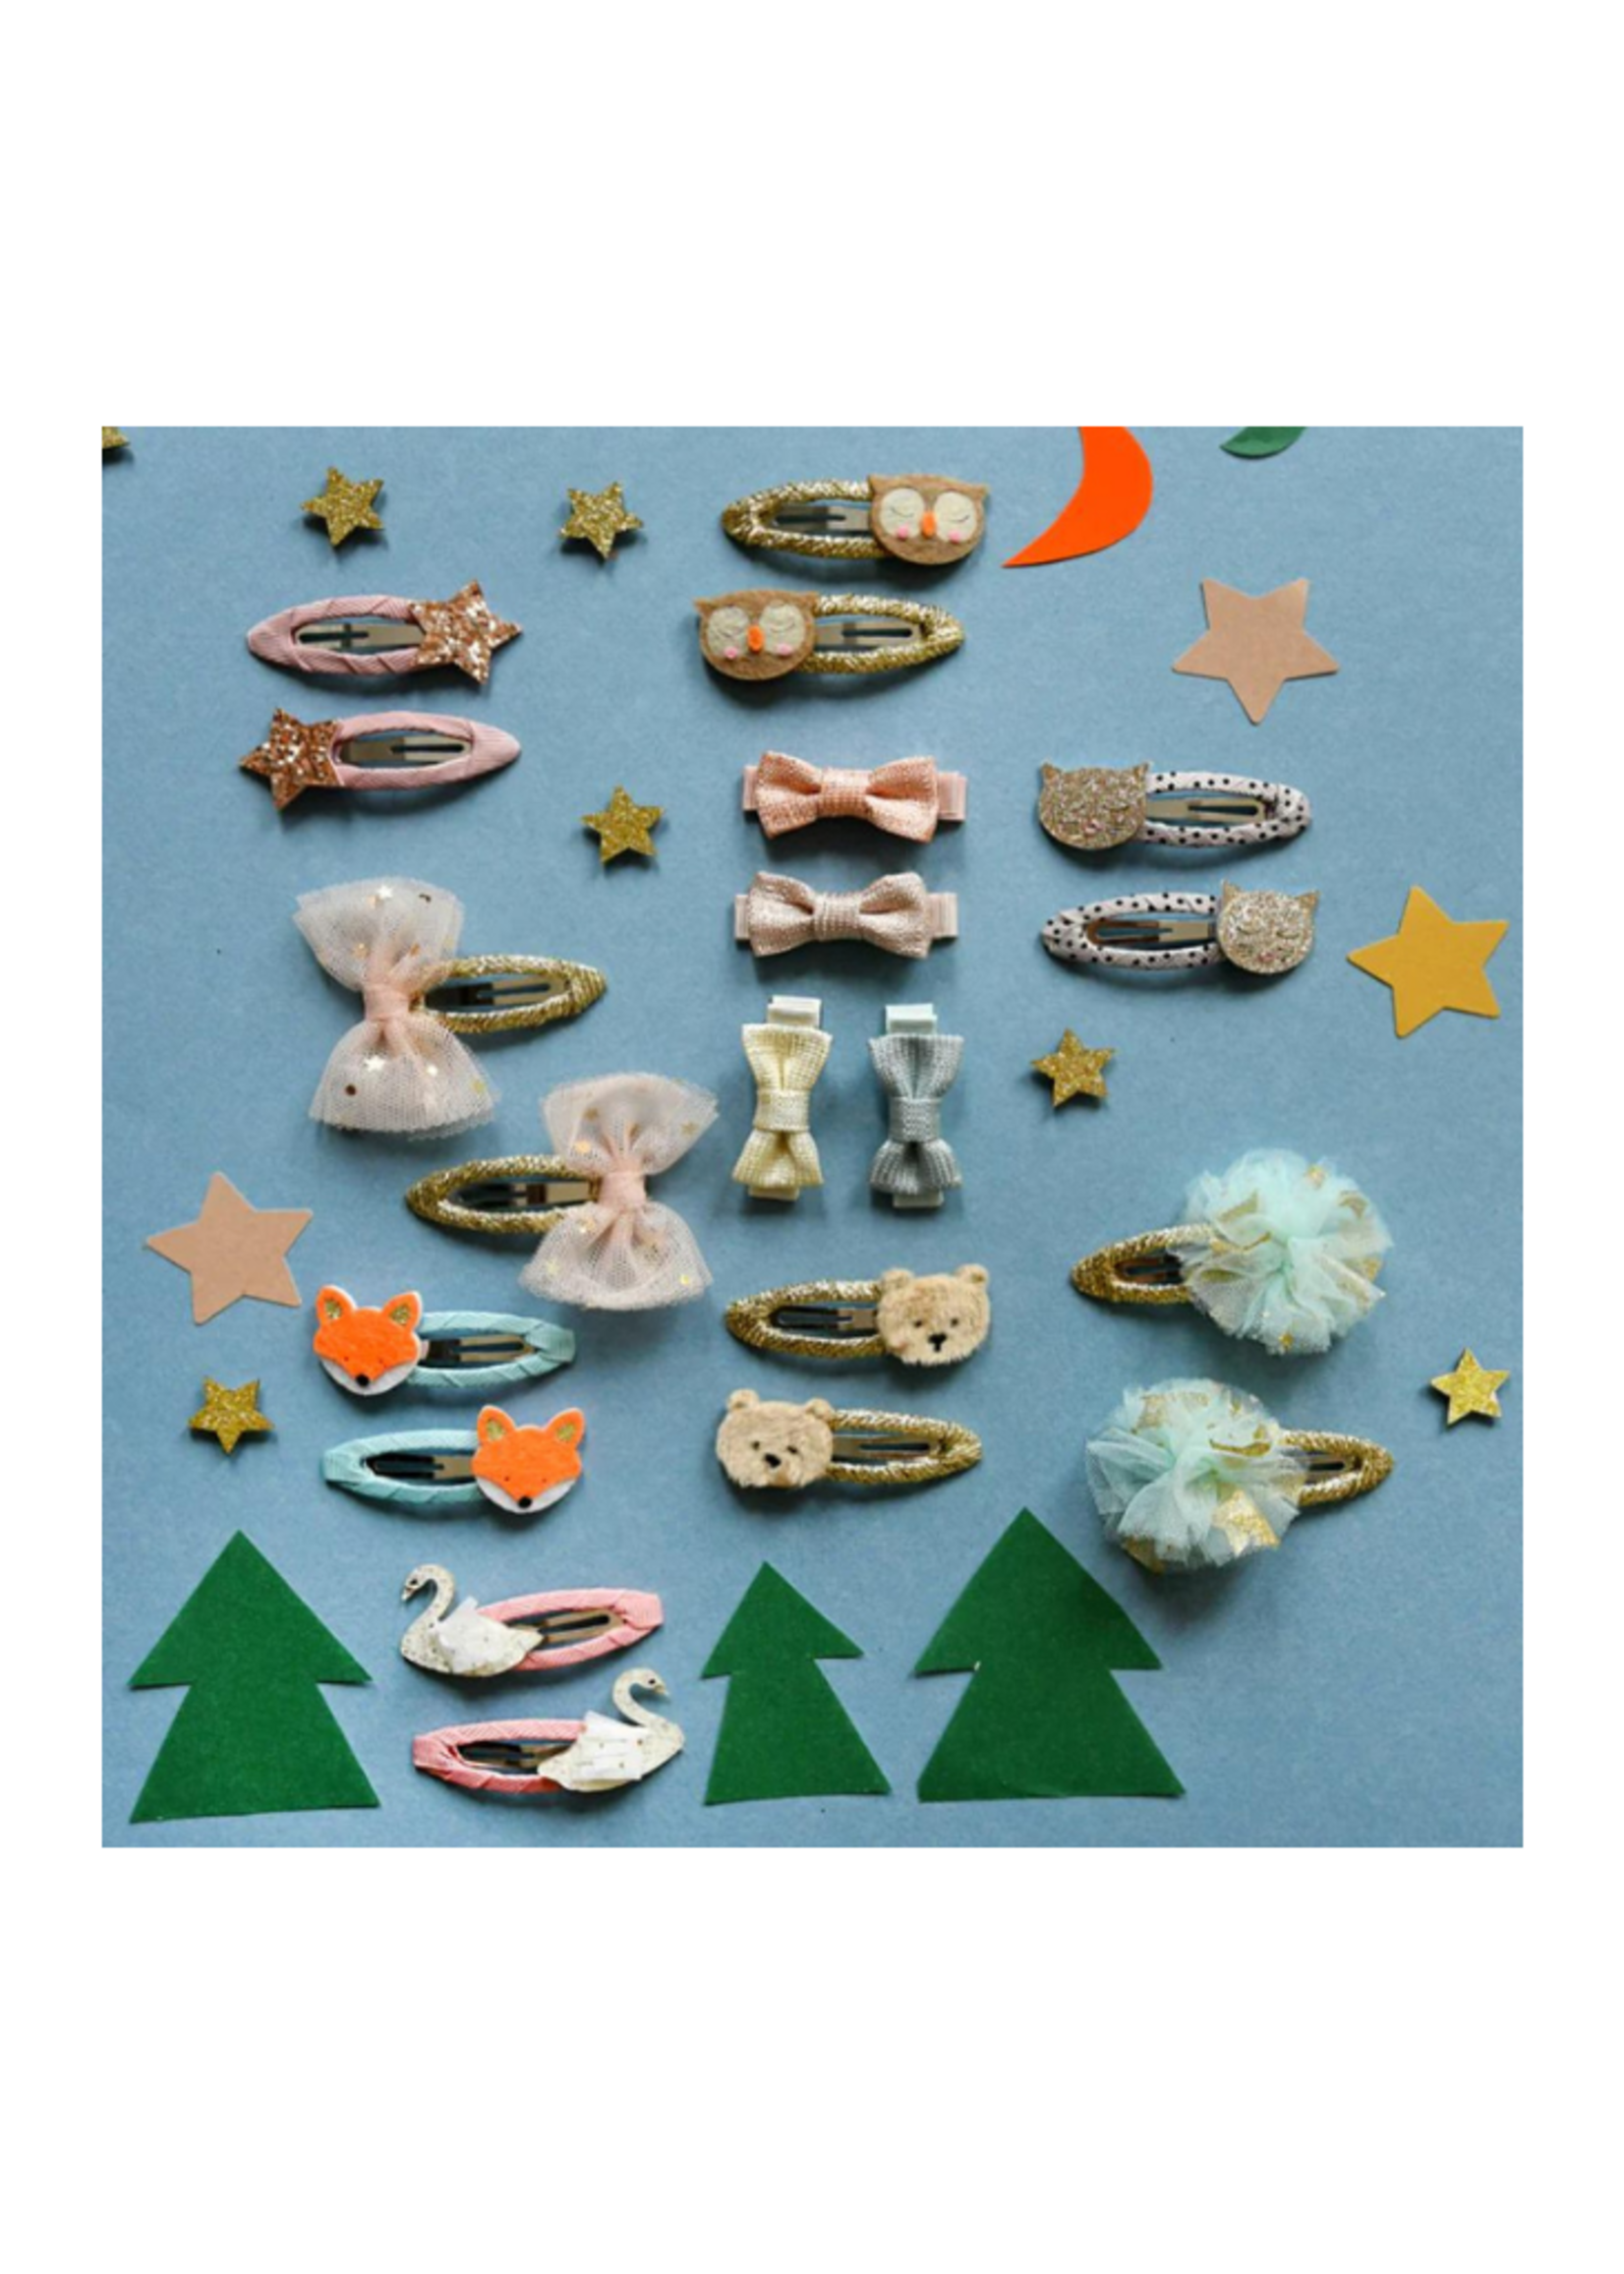 Rockahula Kids Celestial Tulle Bow Clips